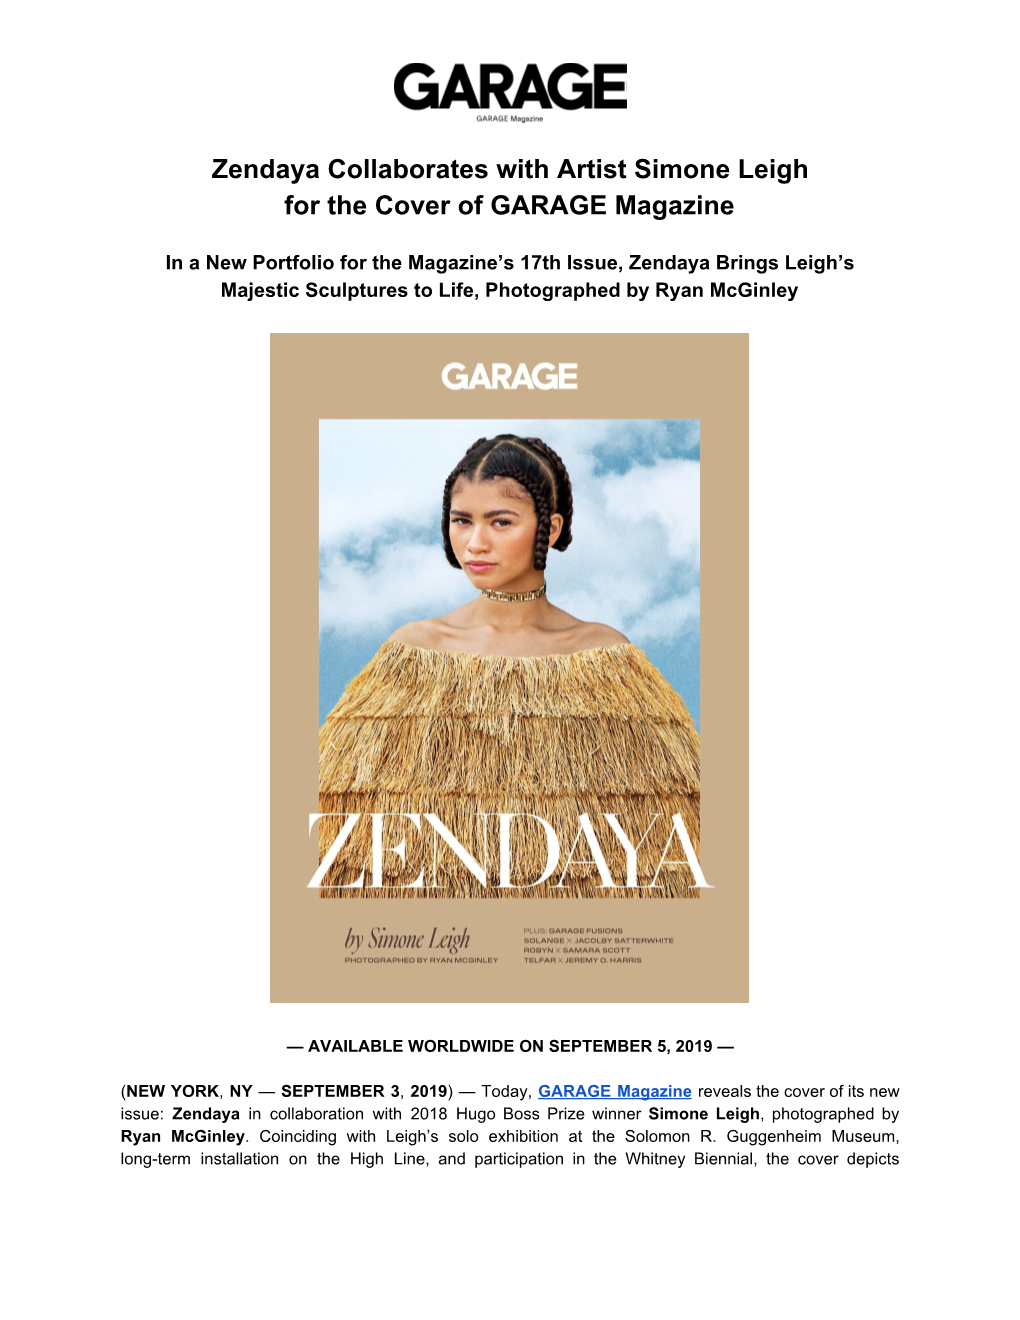 Zendaya Collaborates with Artist Simone Leigh for the Cover of GARAGE Magazine